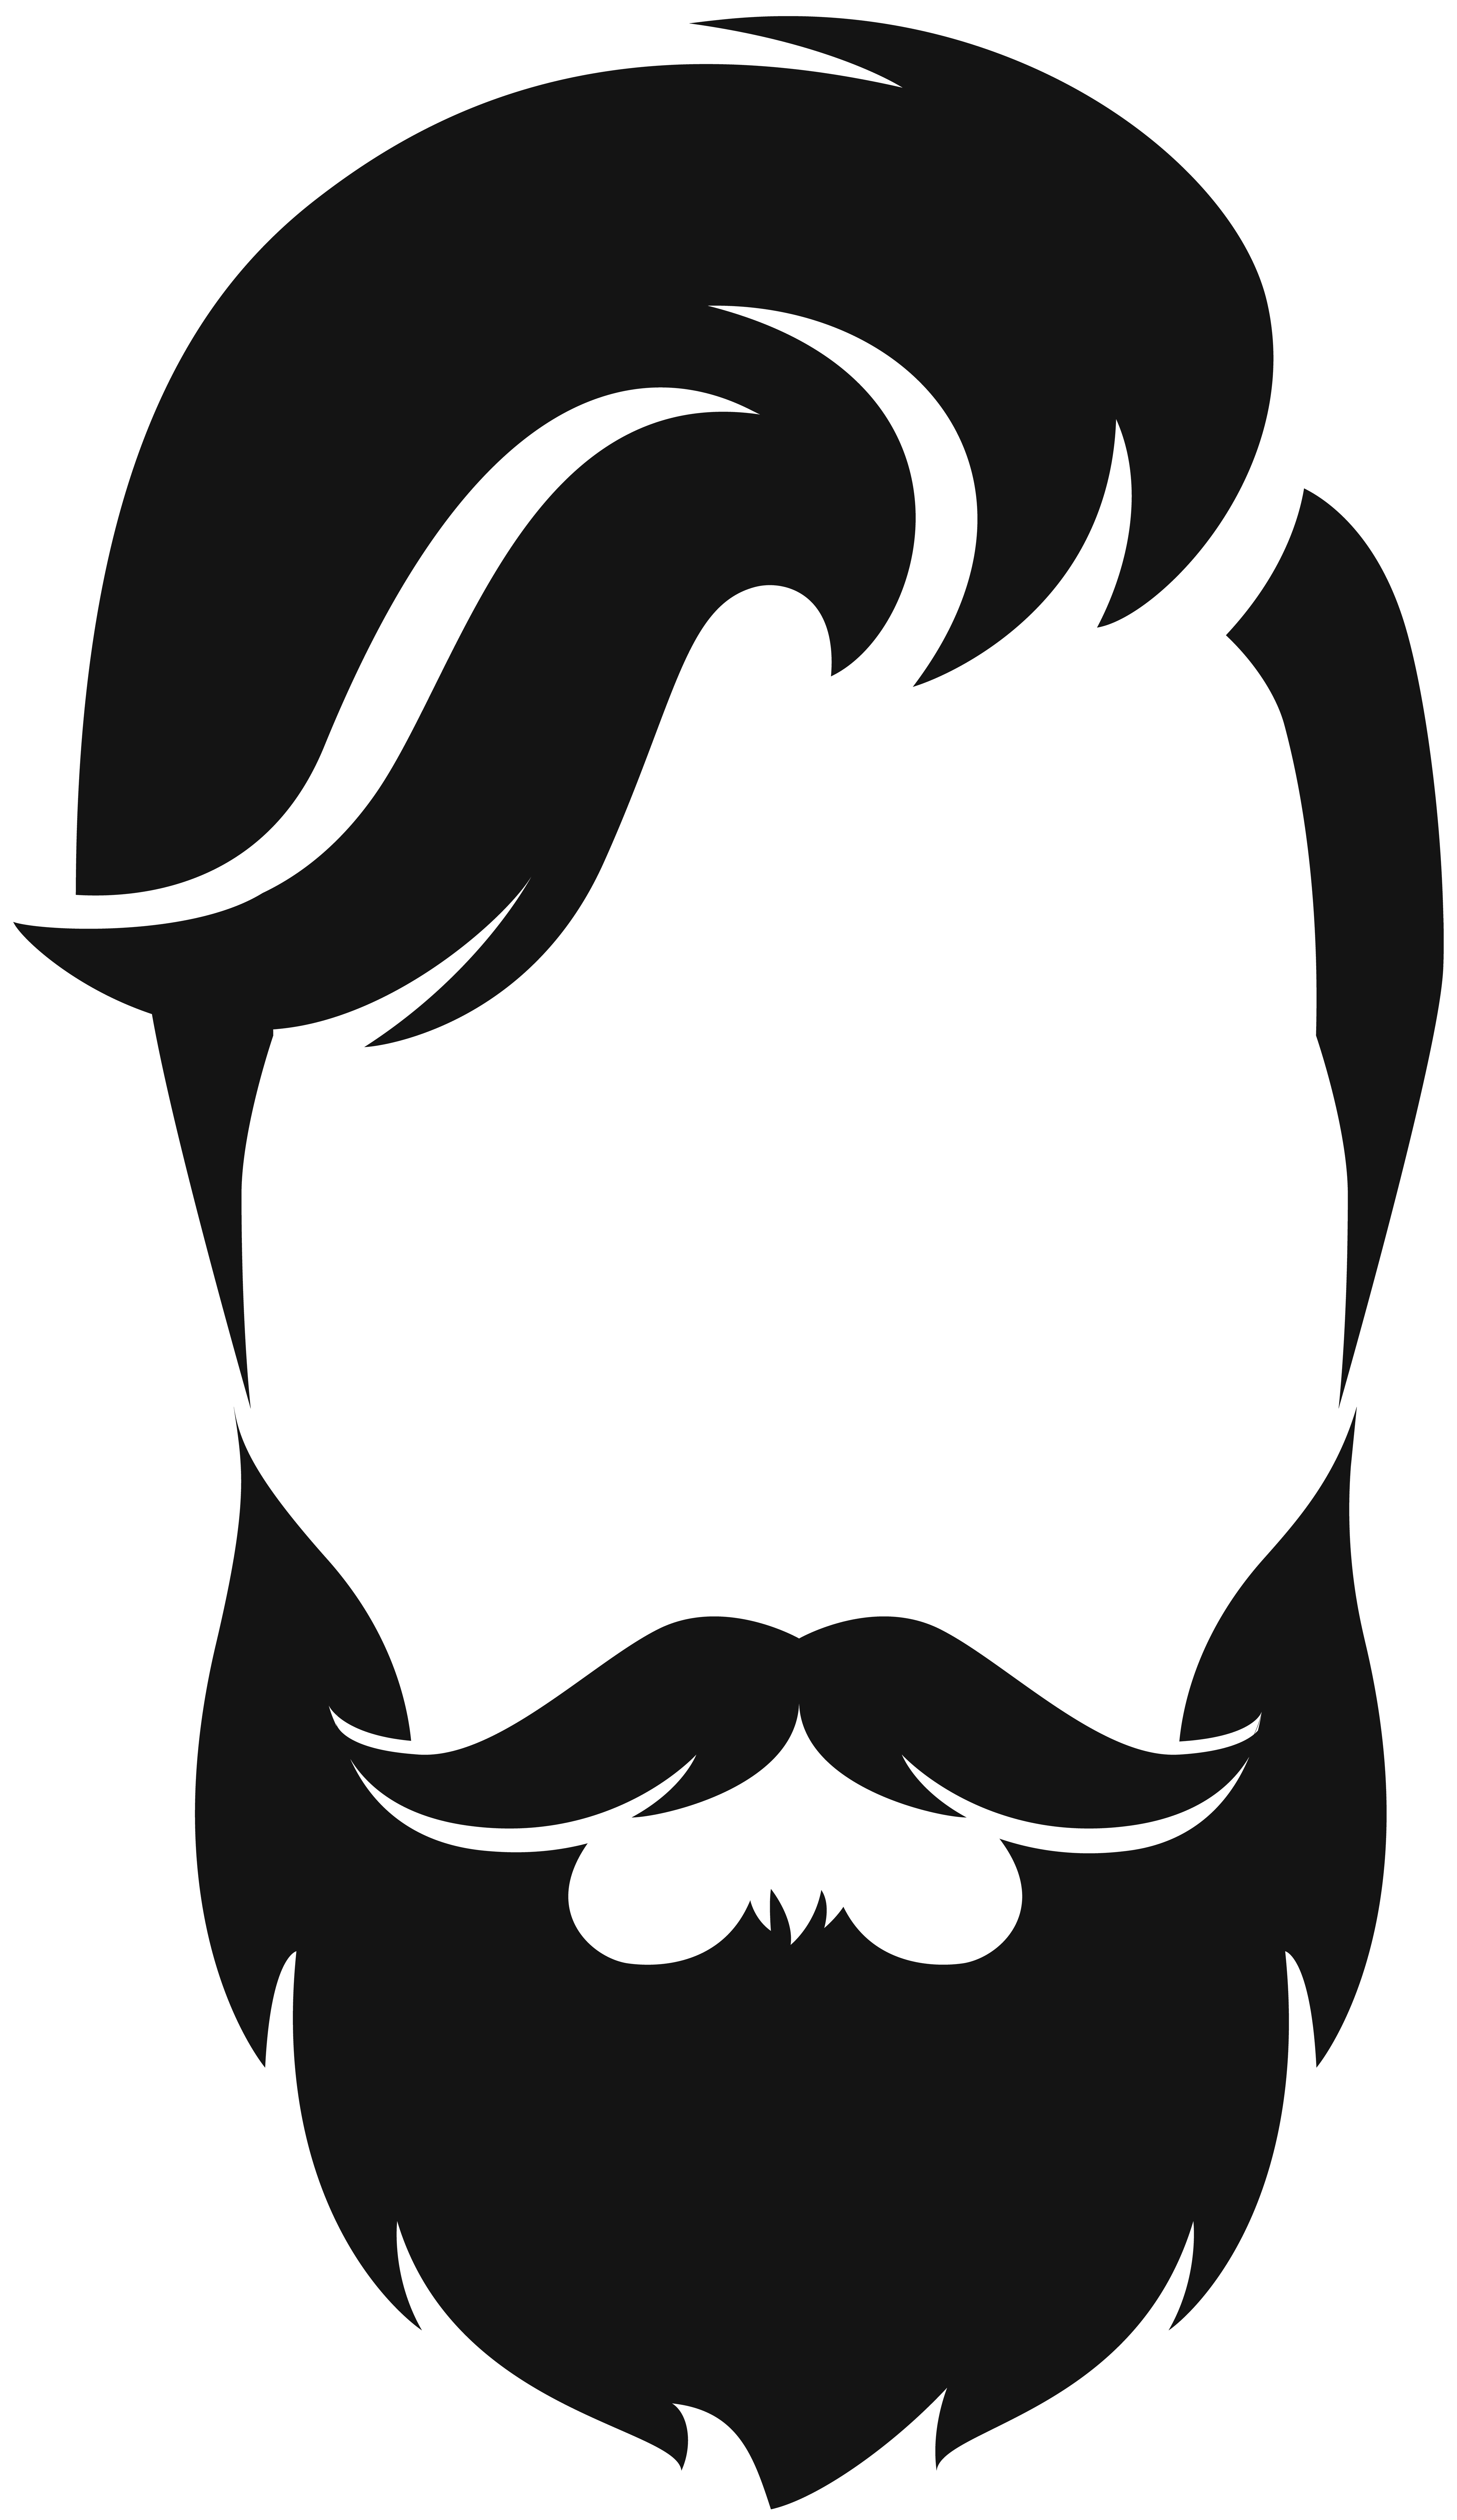 Hair Moustache Style Silhouette Beard Free Transparent Image HD Clipart